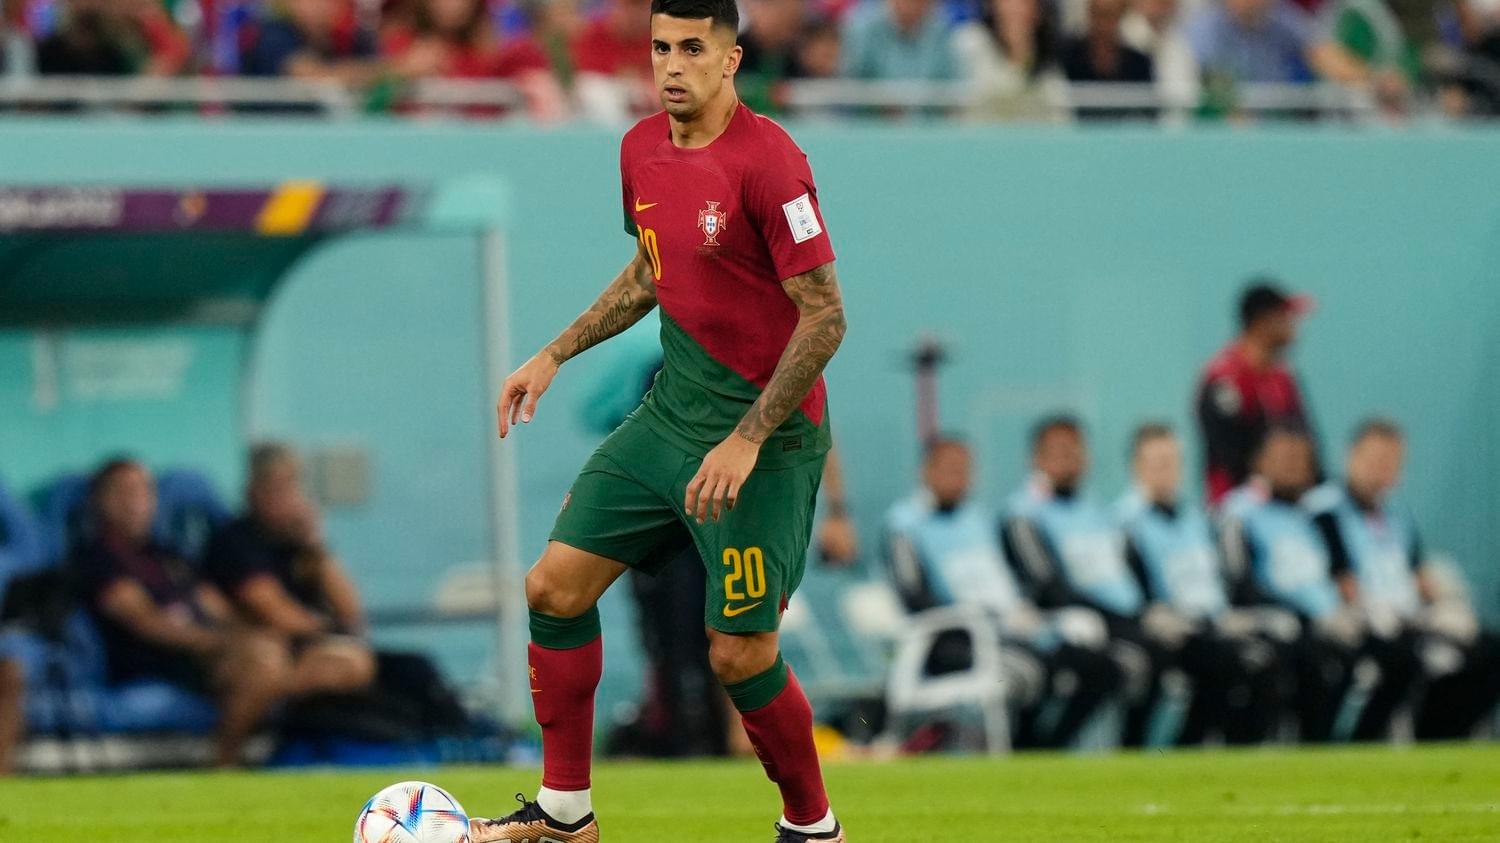 Joao Cancelo is playing on the World Cup 2022